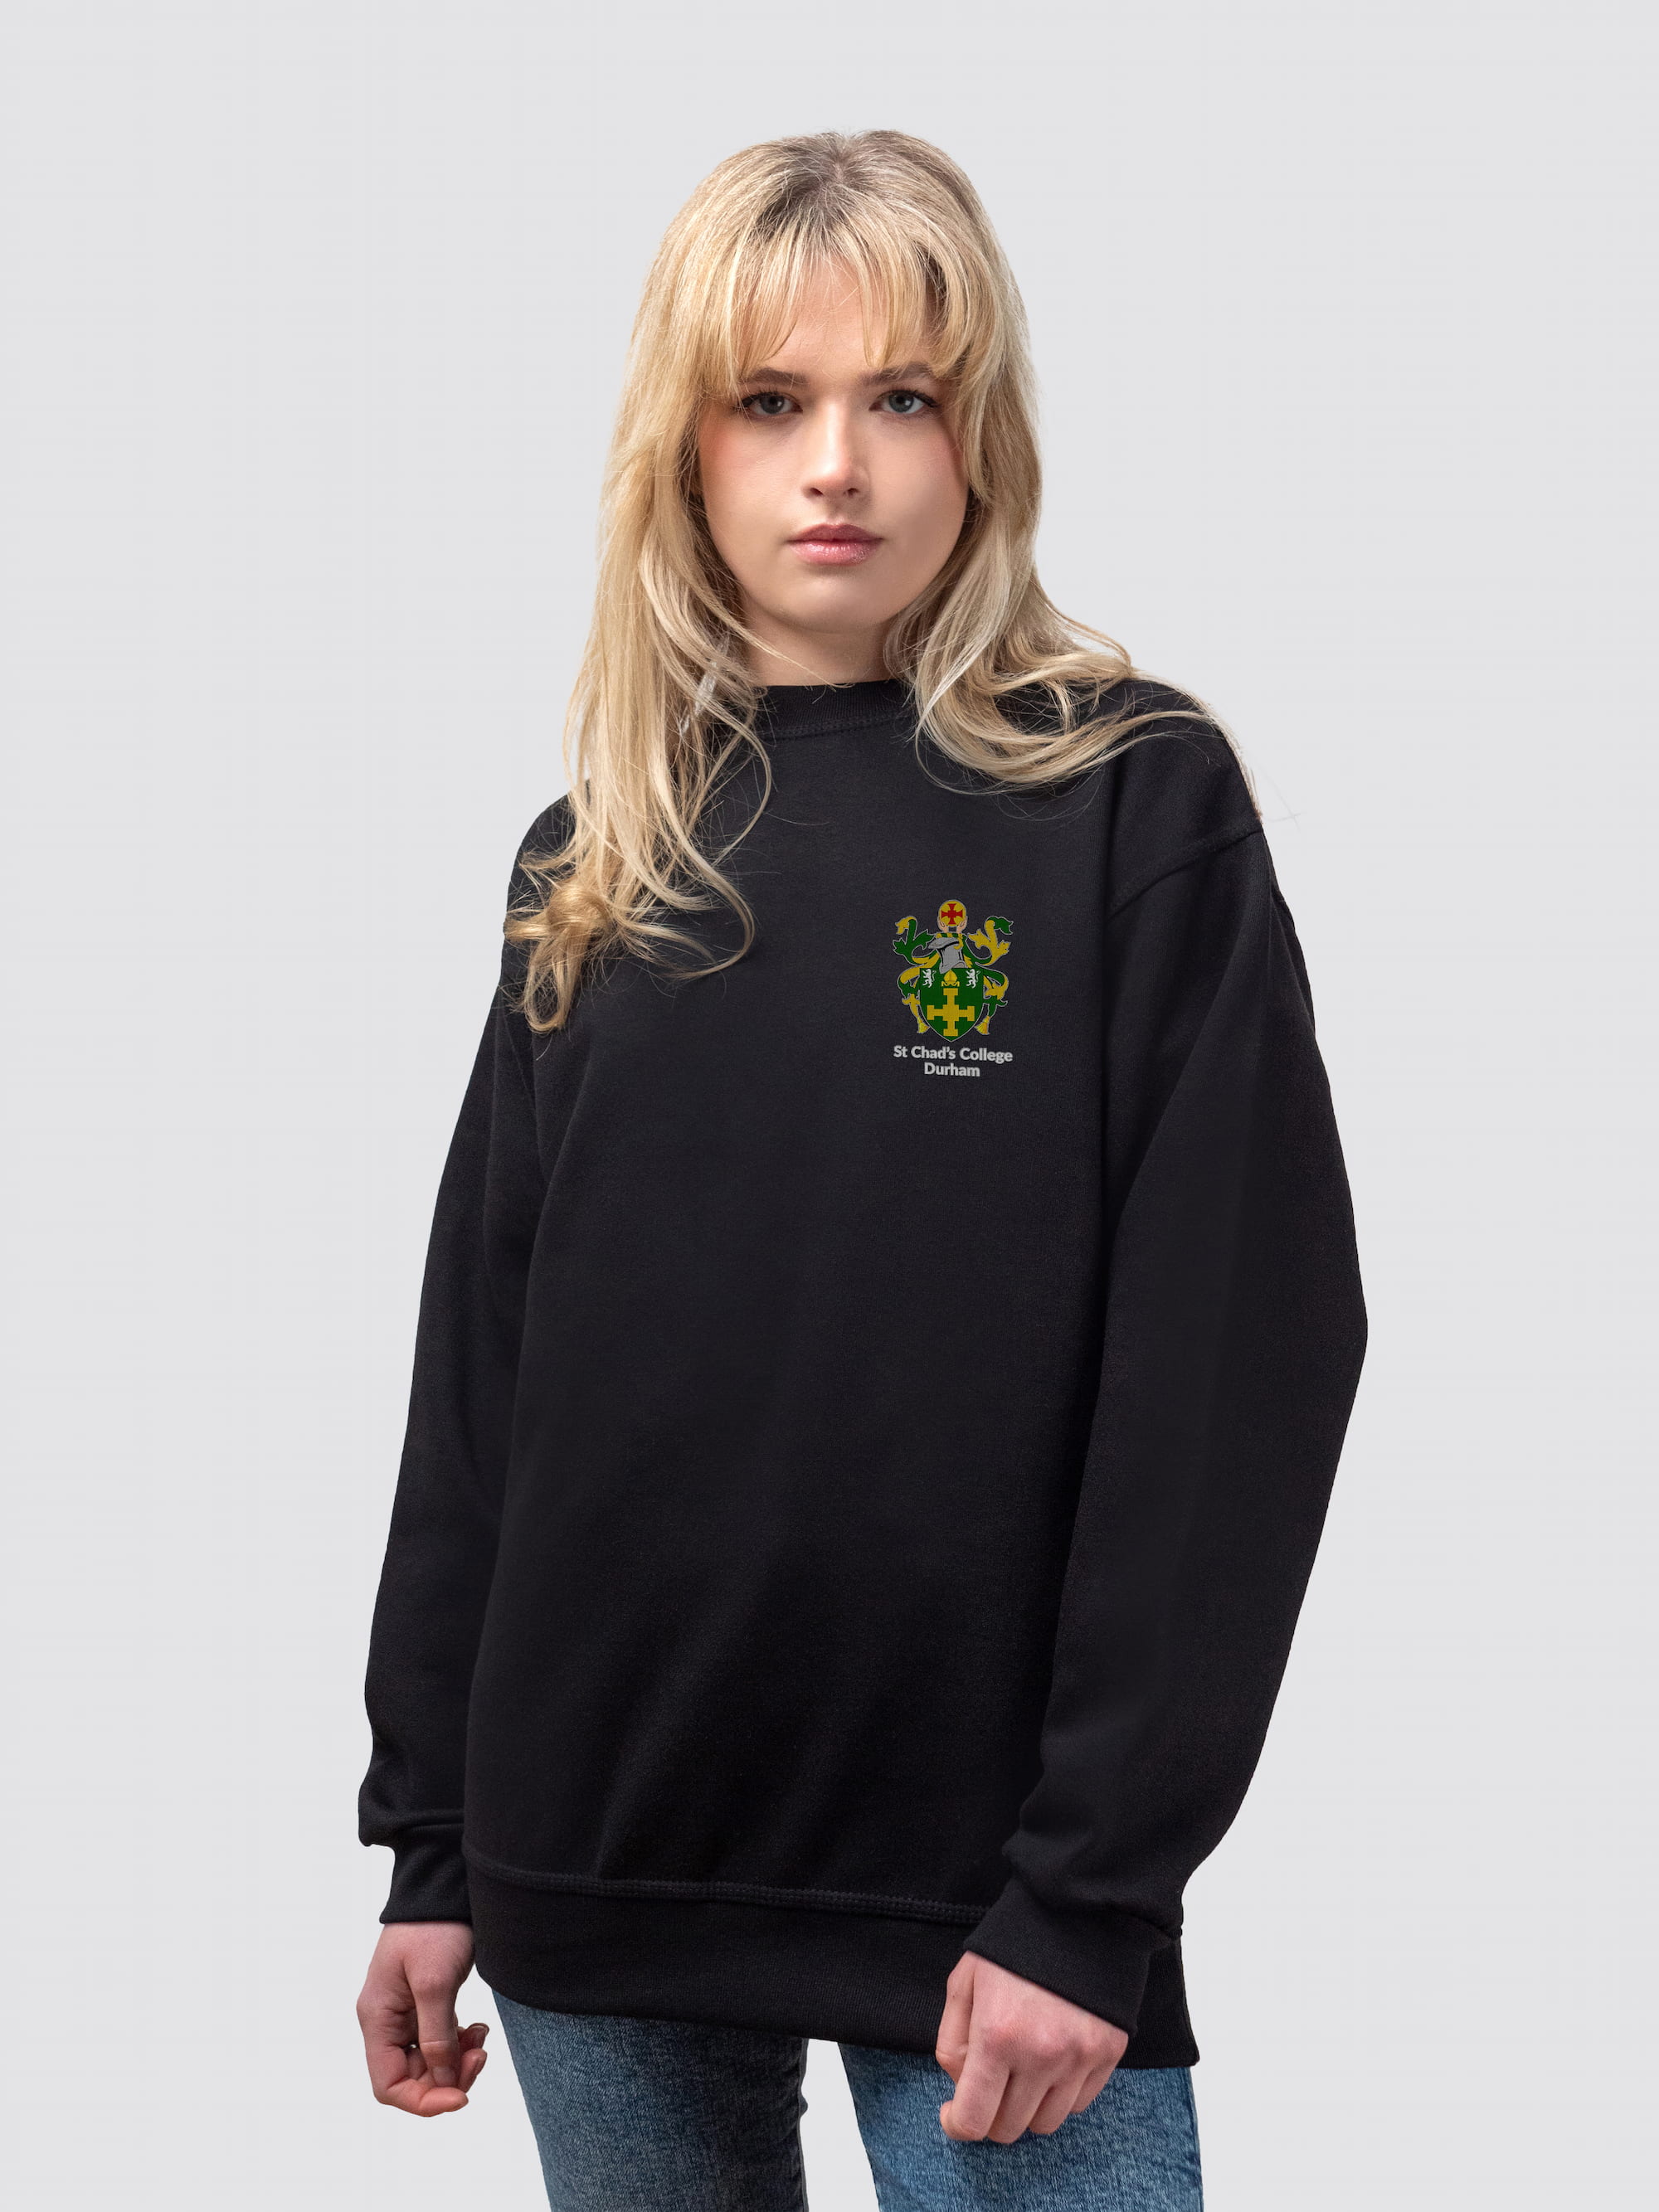 St Chad's crest on the front of a black, crew-neck sweatshirt